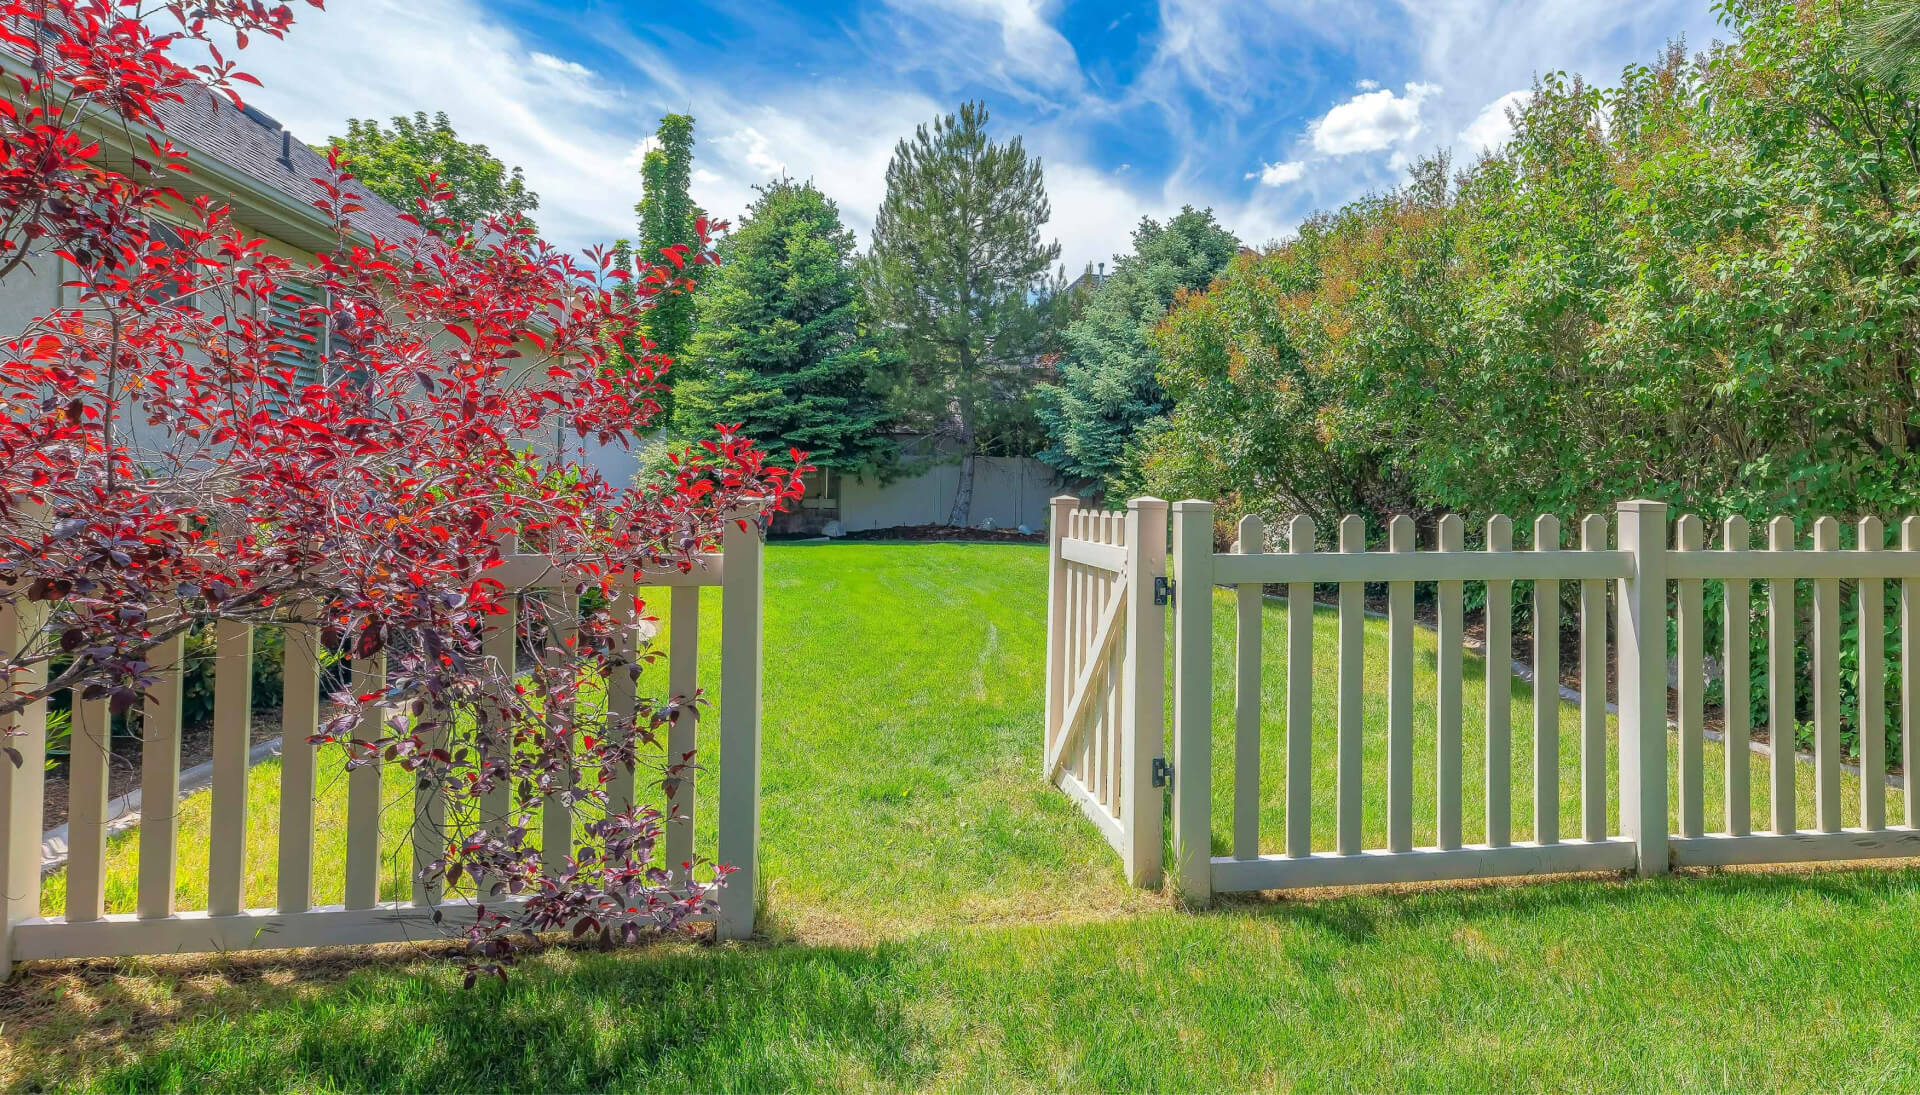 A functional fence gate providing access to a well-maintained backyard, surrounded by a wooden fence in Salem